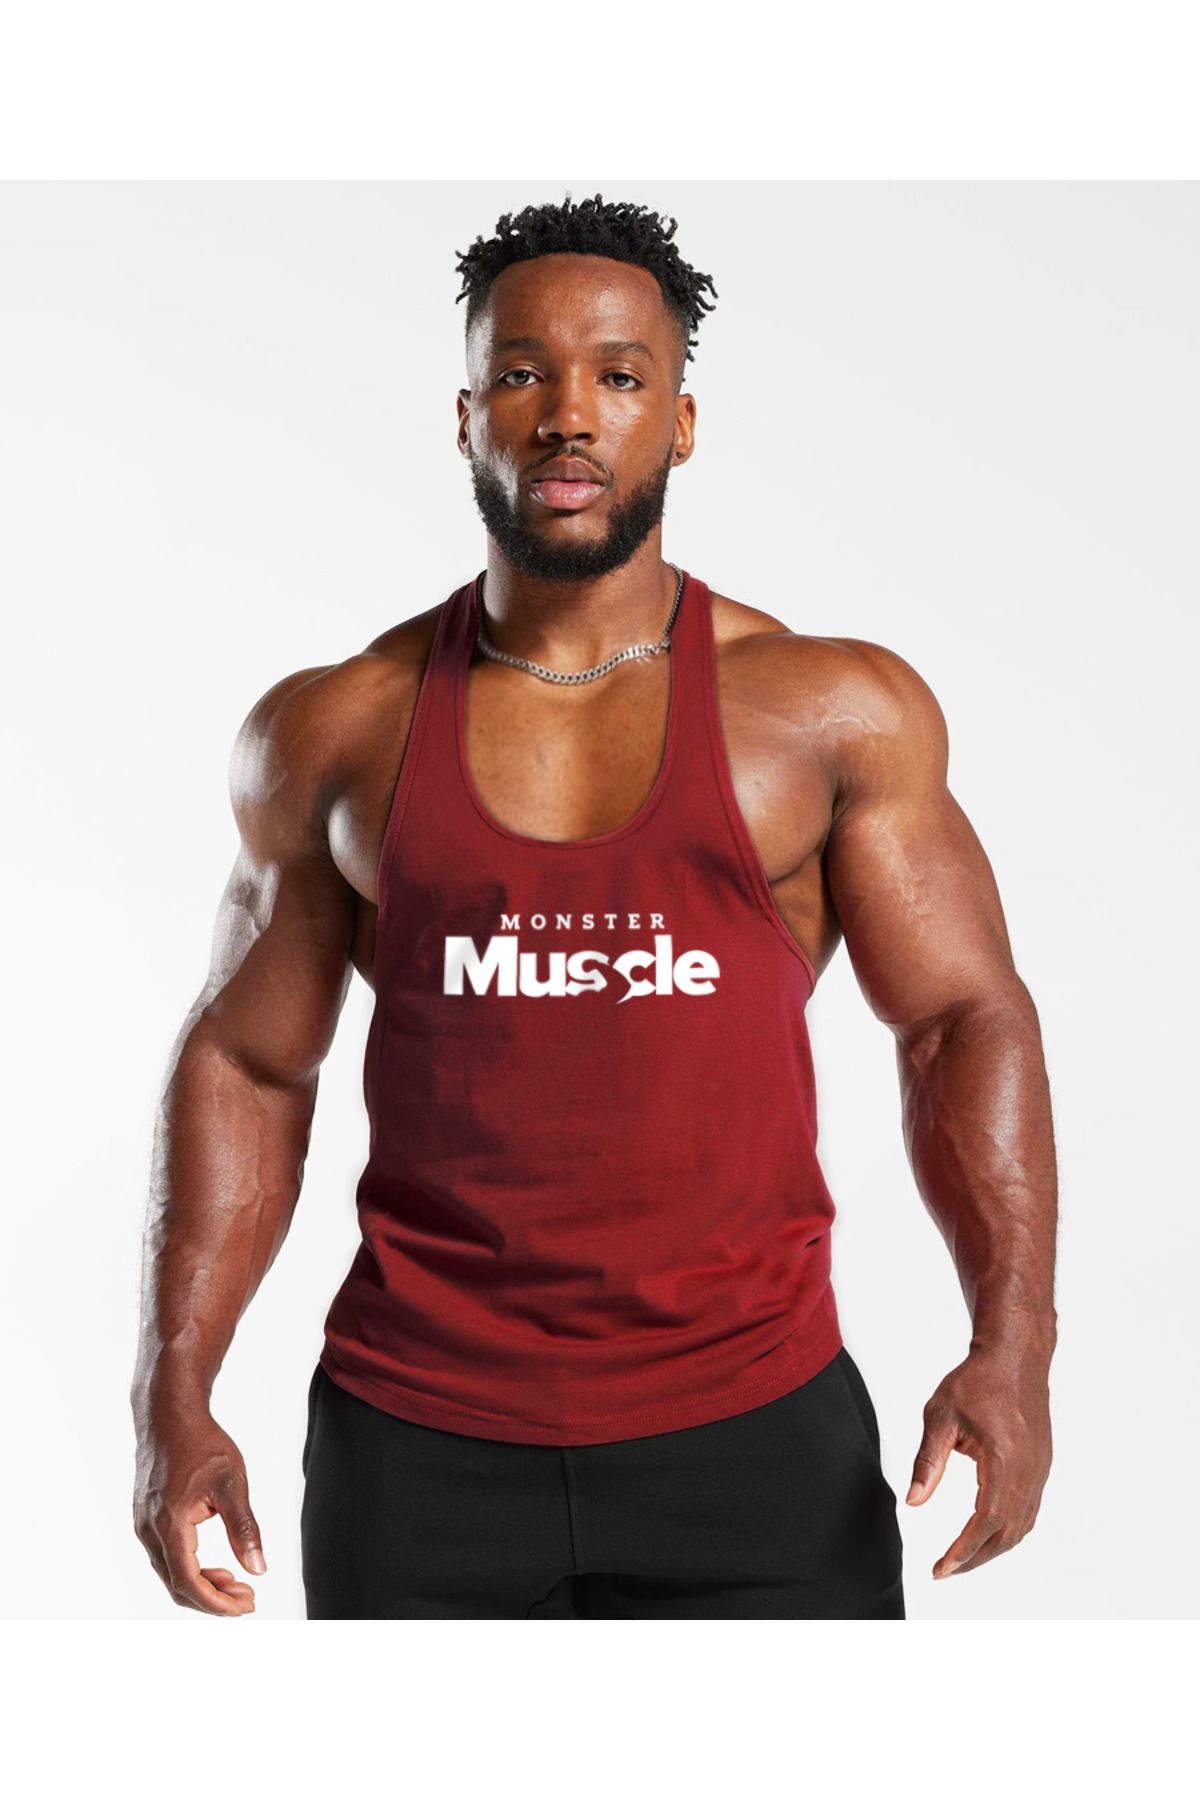 Ghedto Monster Muscle Gym Fitness Tank Top Sporcu Atleti [Bordo]